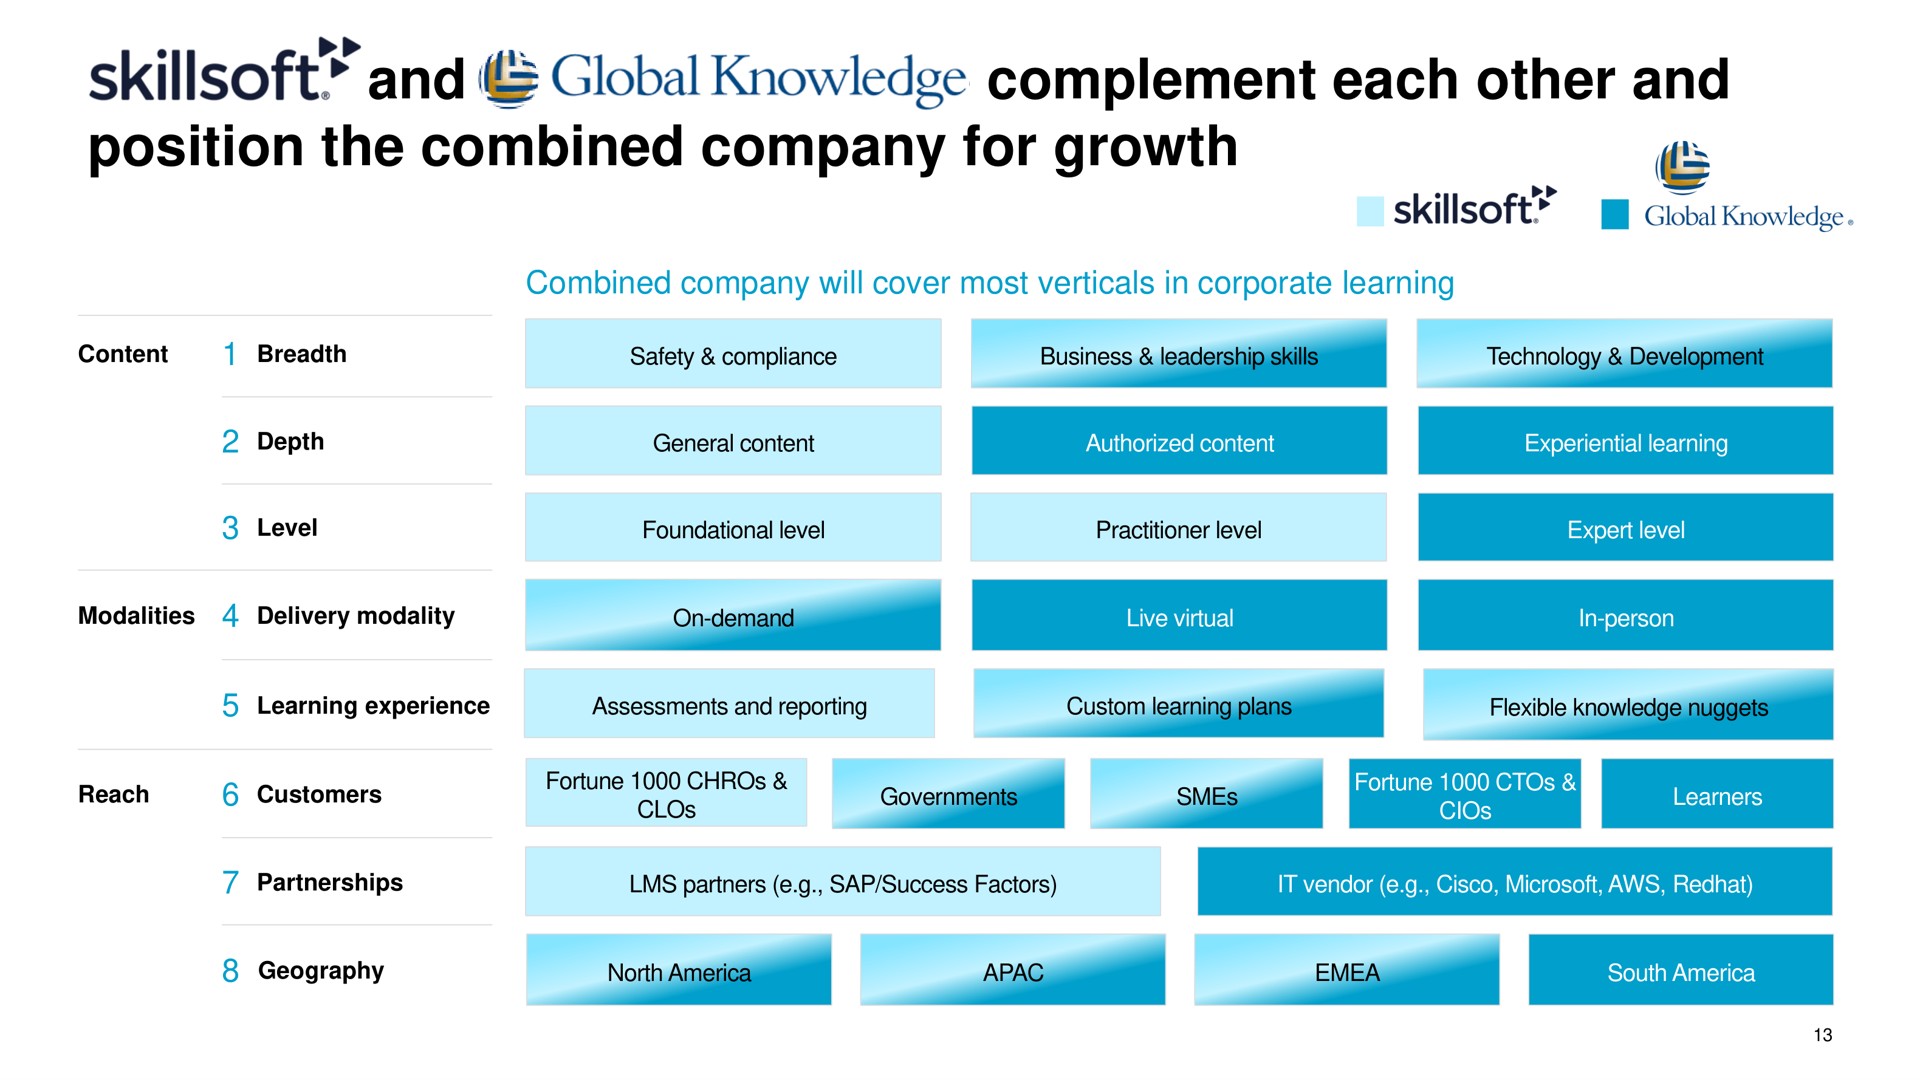 and global knowledge complement each other and position the combined company for growth | Skillsoft